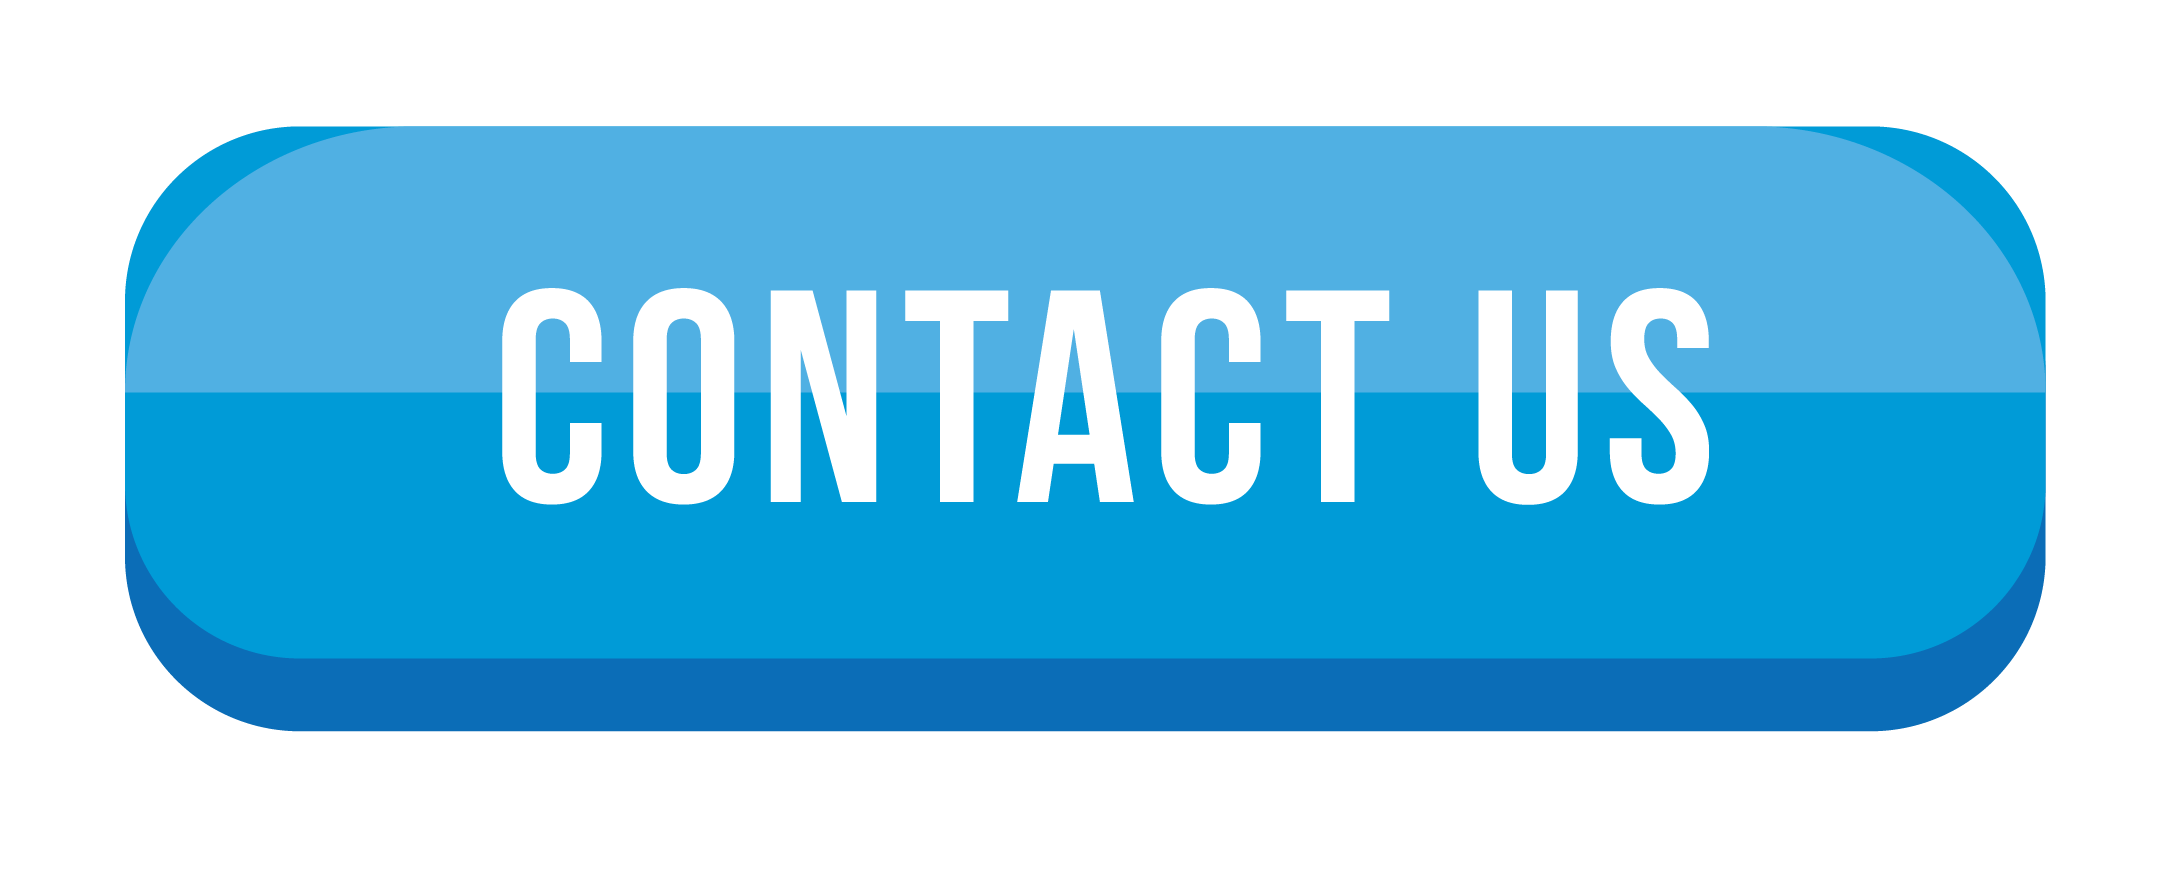 Contact Us Button PNG Images Transparent Background  PNG Play